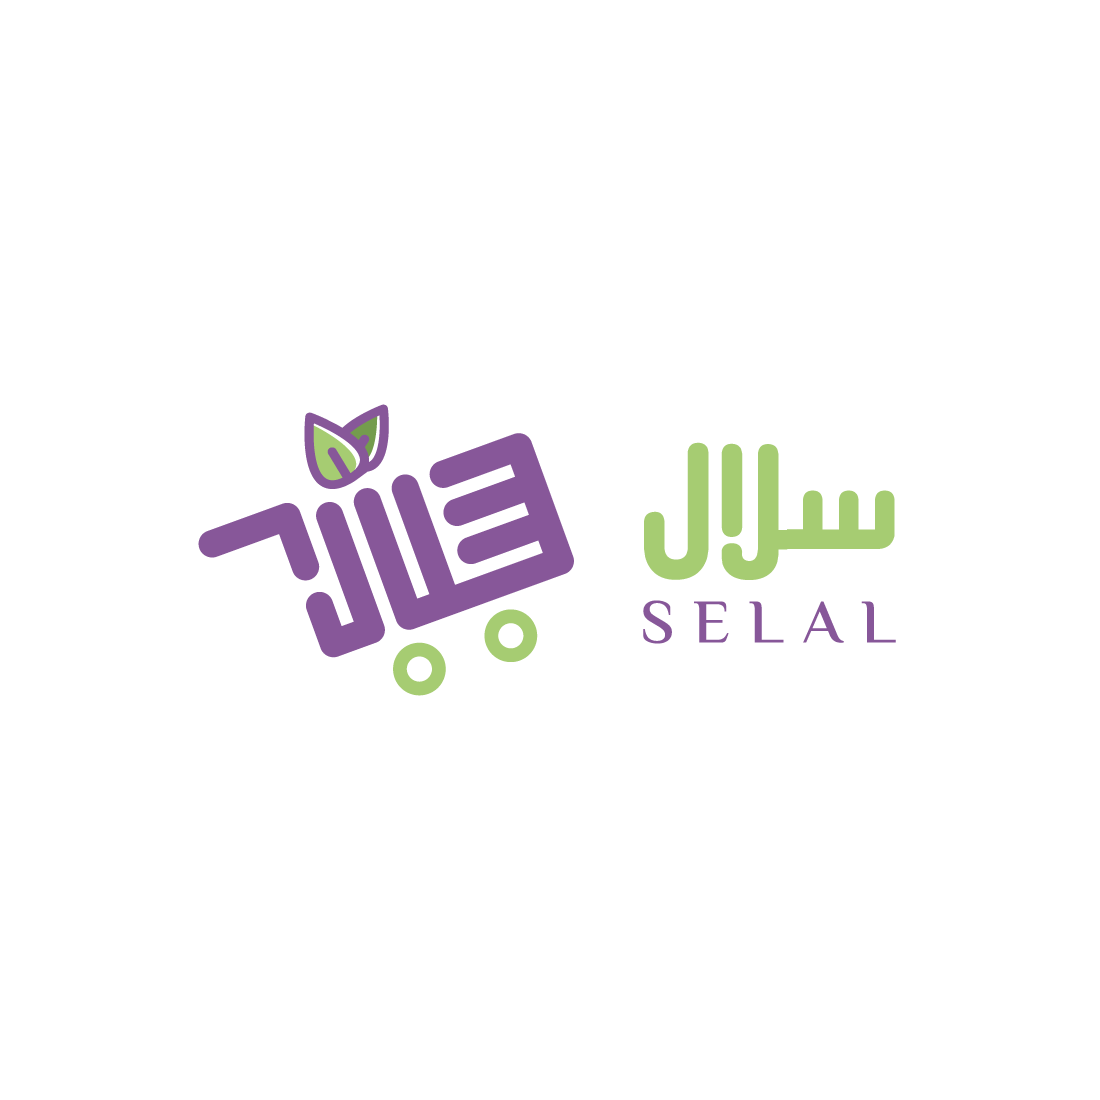 selal logo preview image.